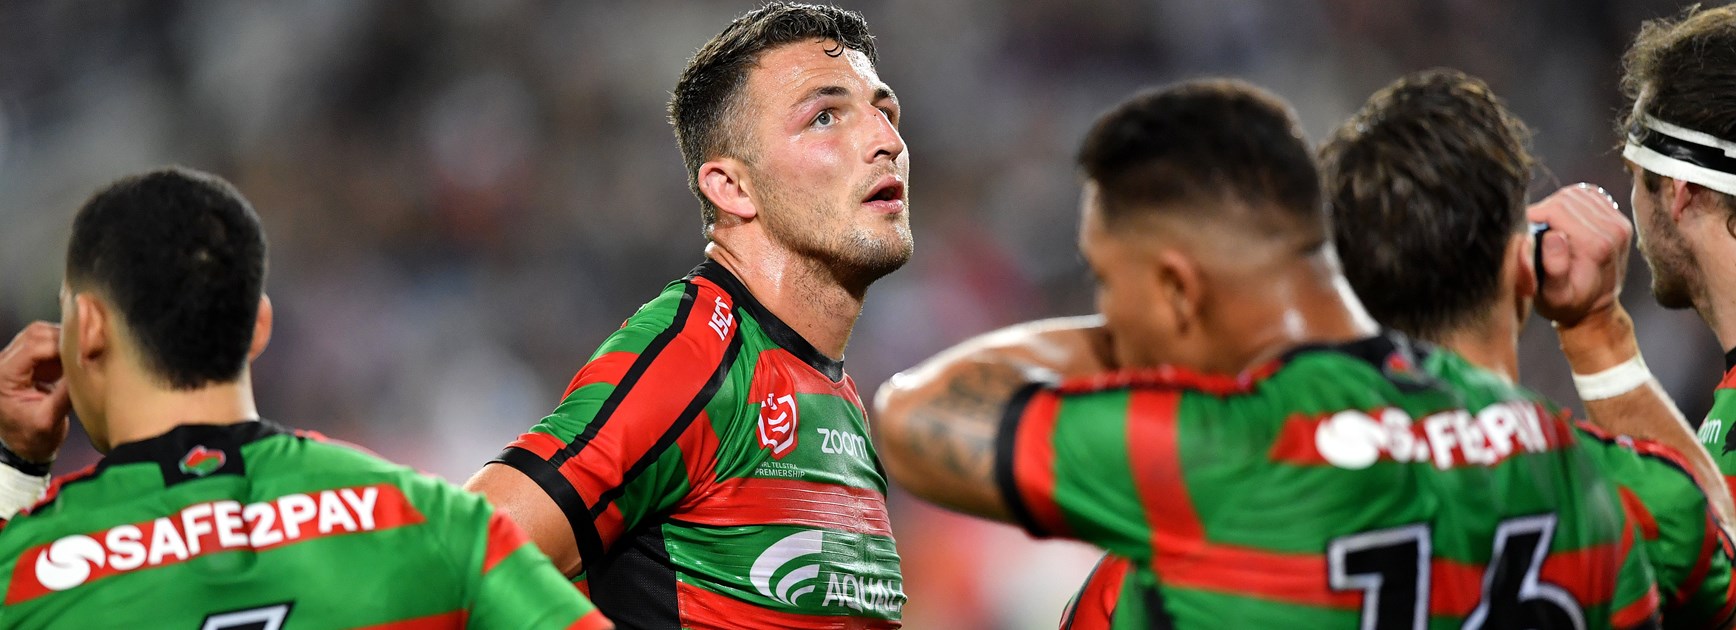 'NRL ornament' Burgess, Souths facing hard call on future and cap